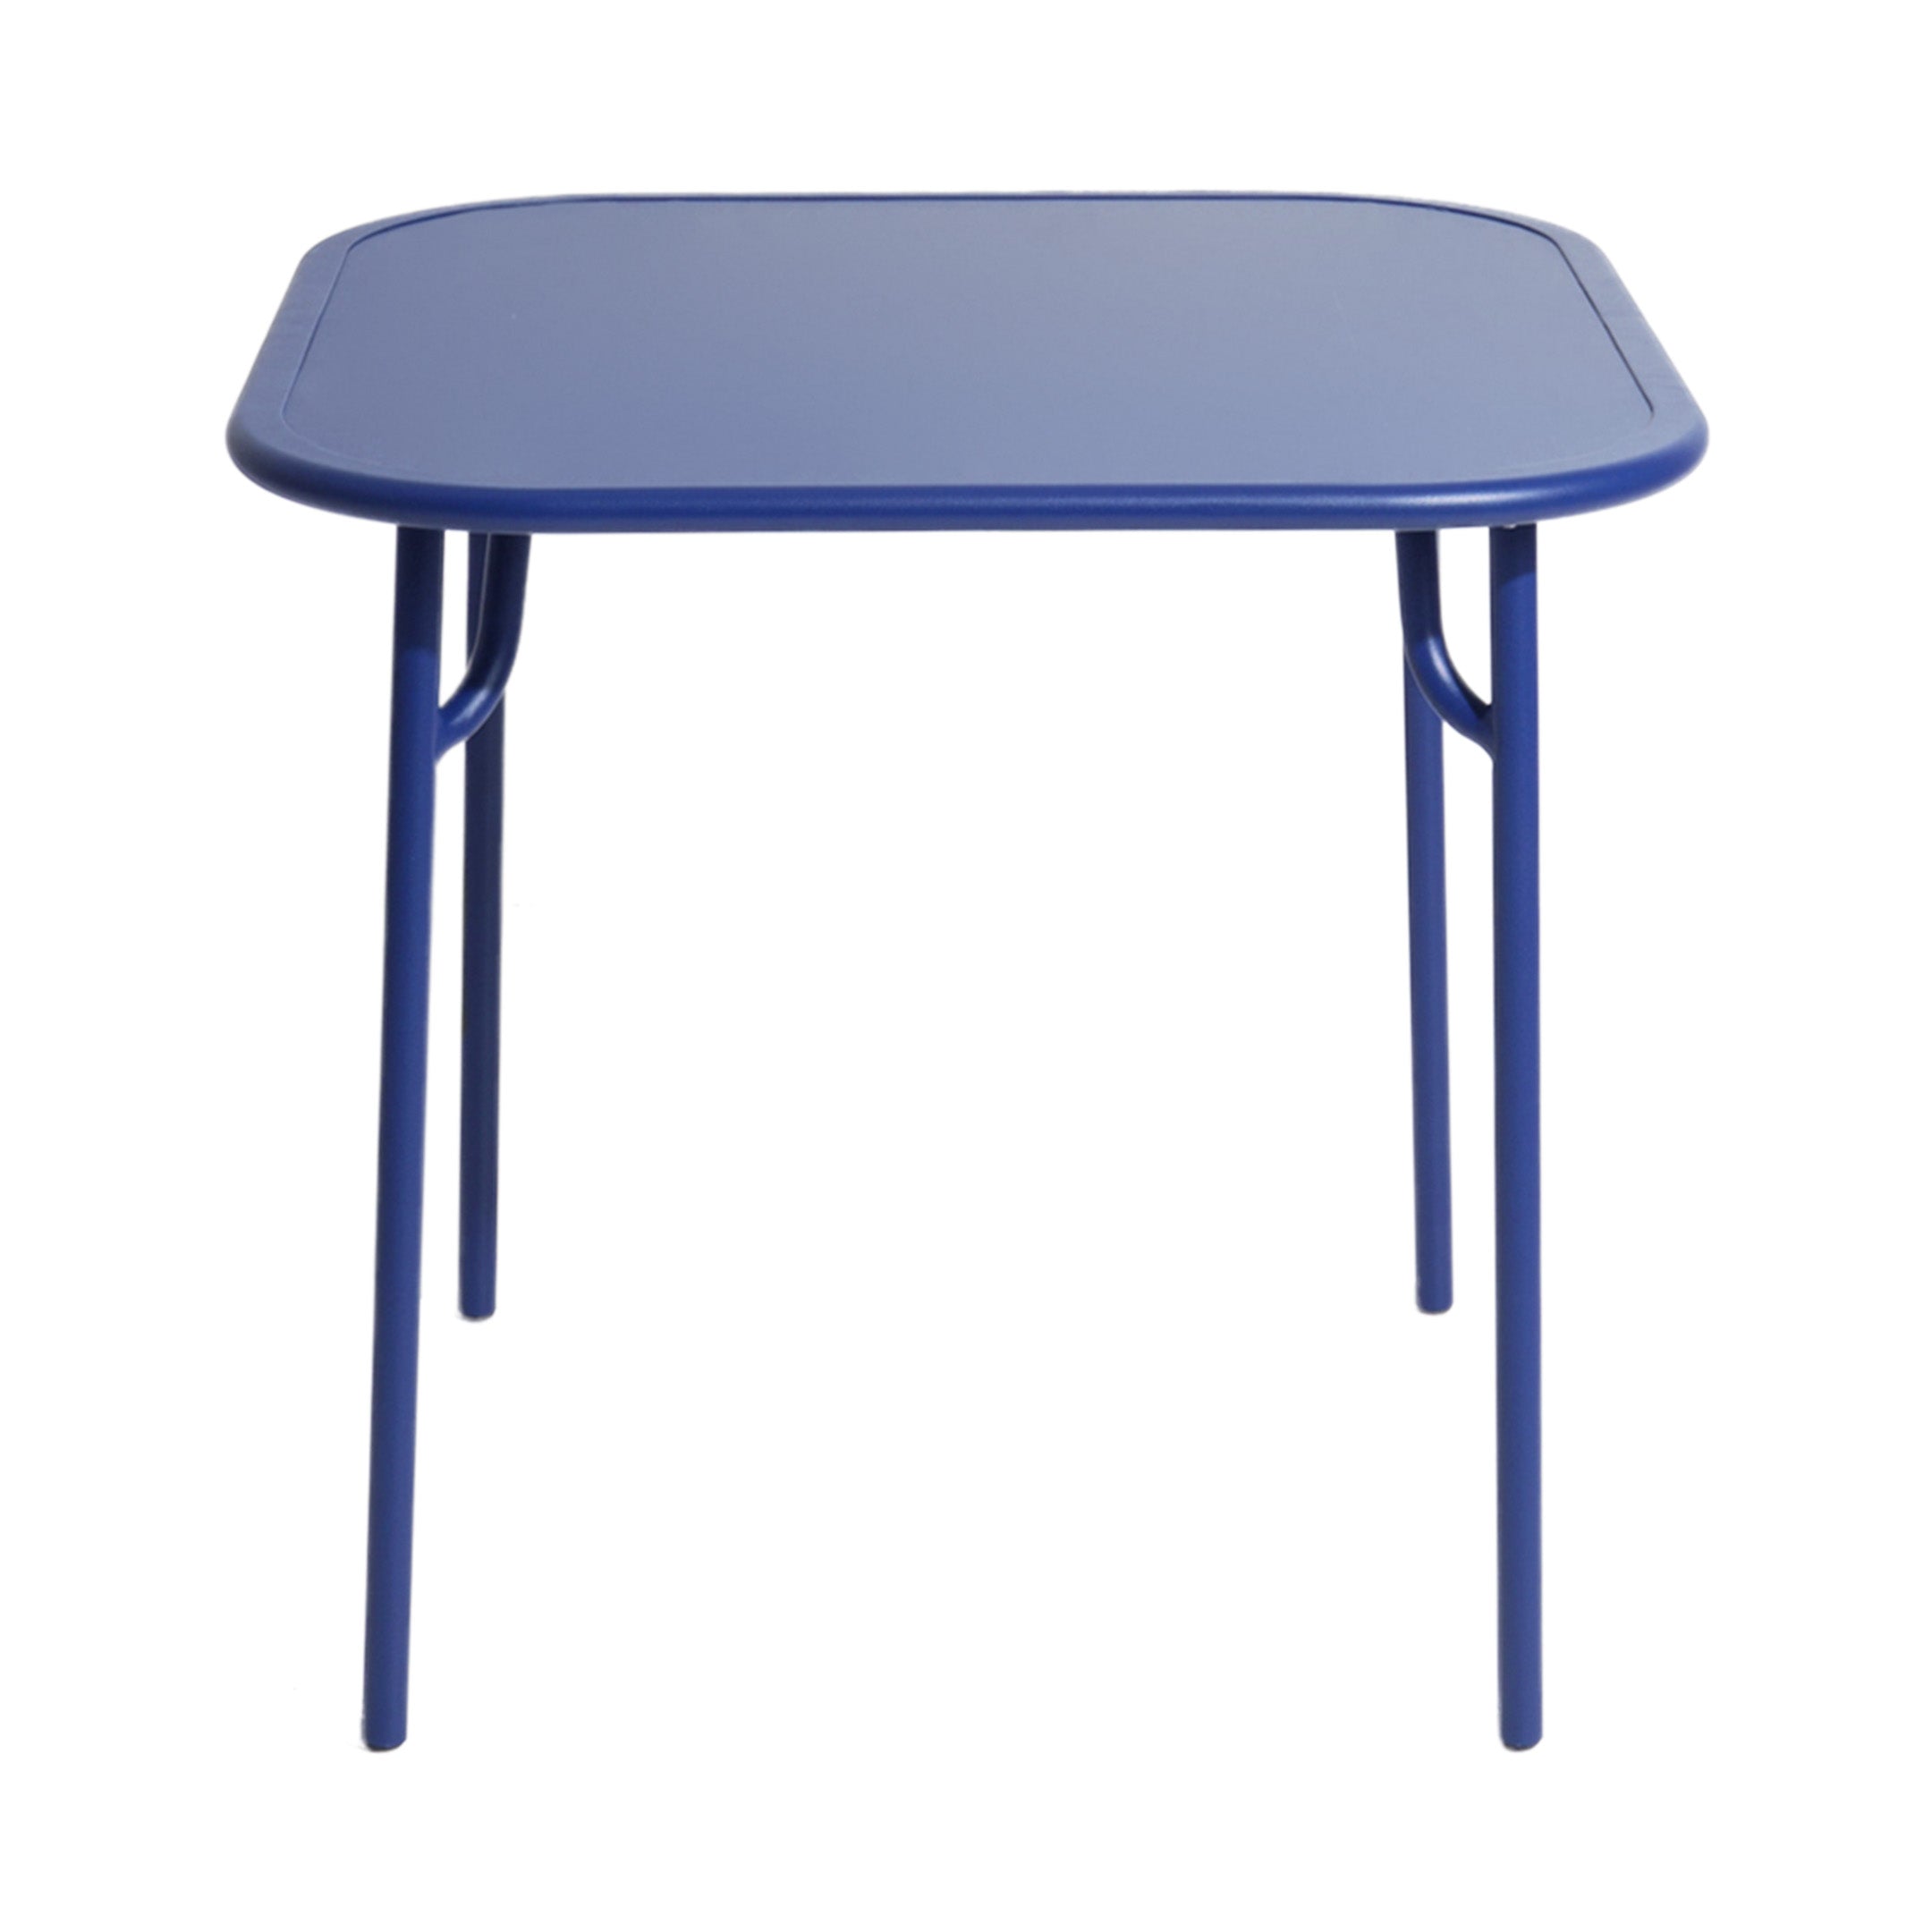 Week-End Square Dining Table: Blue